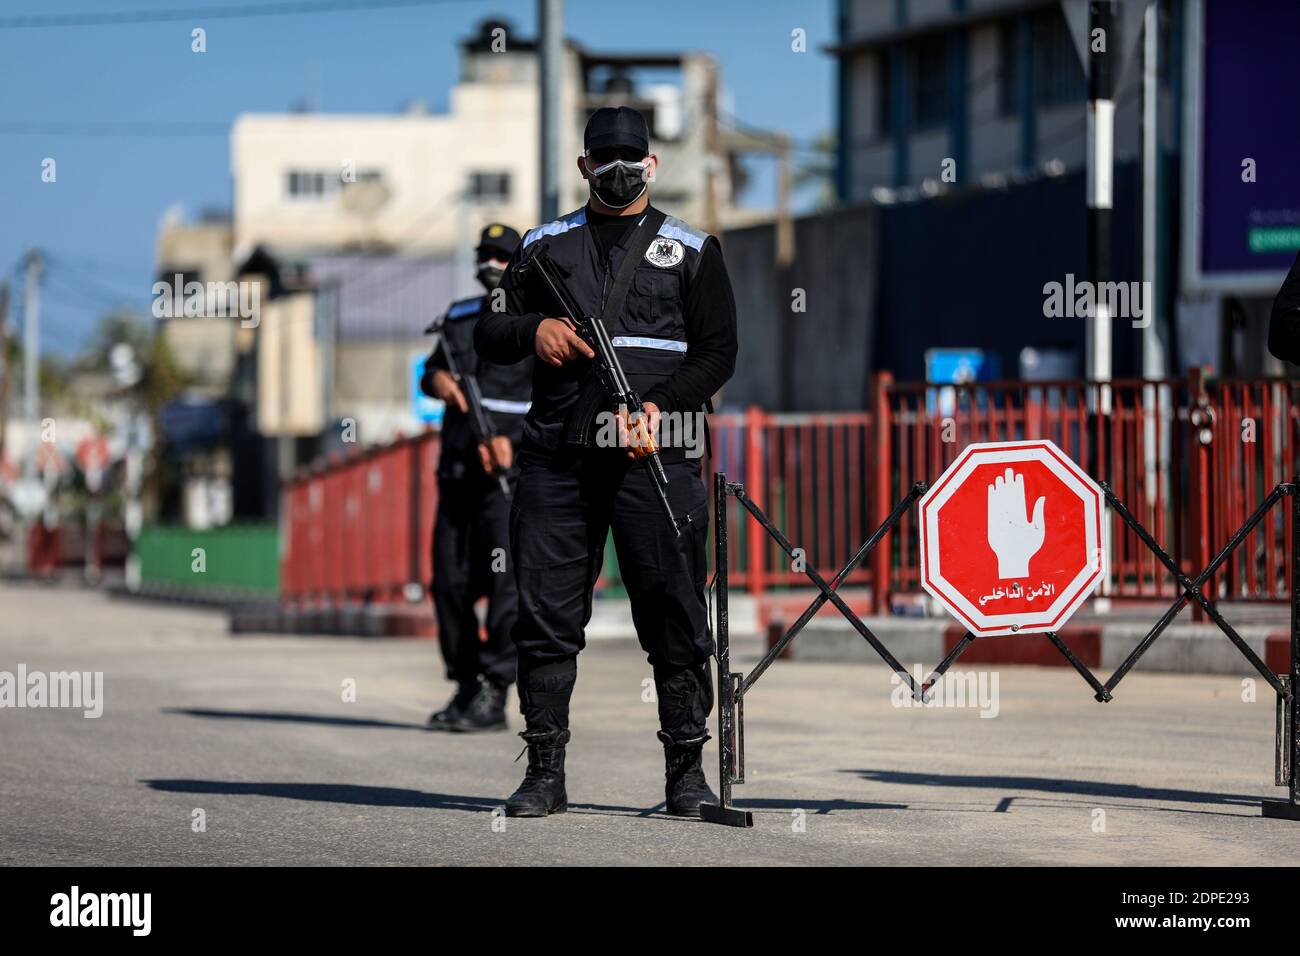 Gaza. 19th Dec, 2020. Palestinian policemen stand guard in the Gaza Strip city of Khan Younis amid a lockdown, on Dec. 19, 2020. A full lockdown and curfew have been imposed in the West Bank and the Gaza Strip to curb the growing numbers of COVID-19 infections and deaths. Credit: Yasser Qudih/Xinhua/Alamy Live News Stock Photo